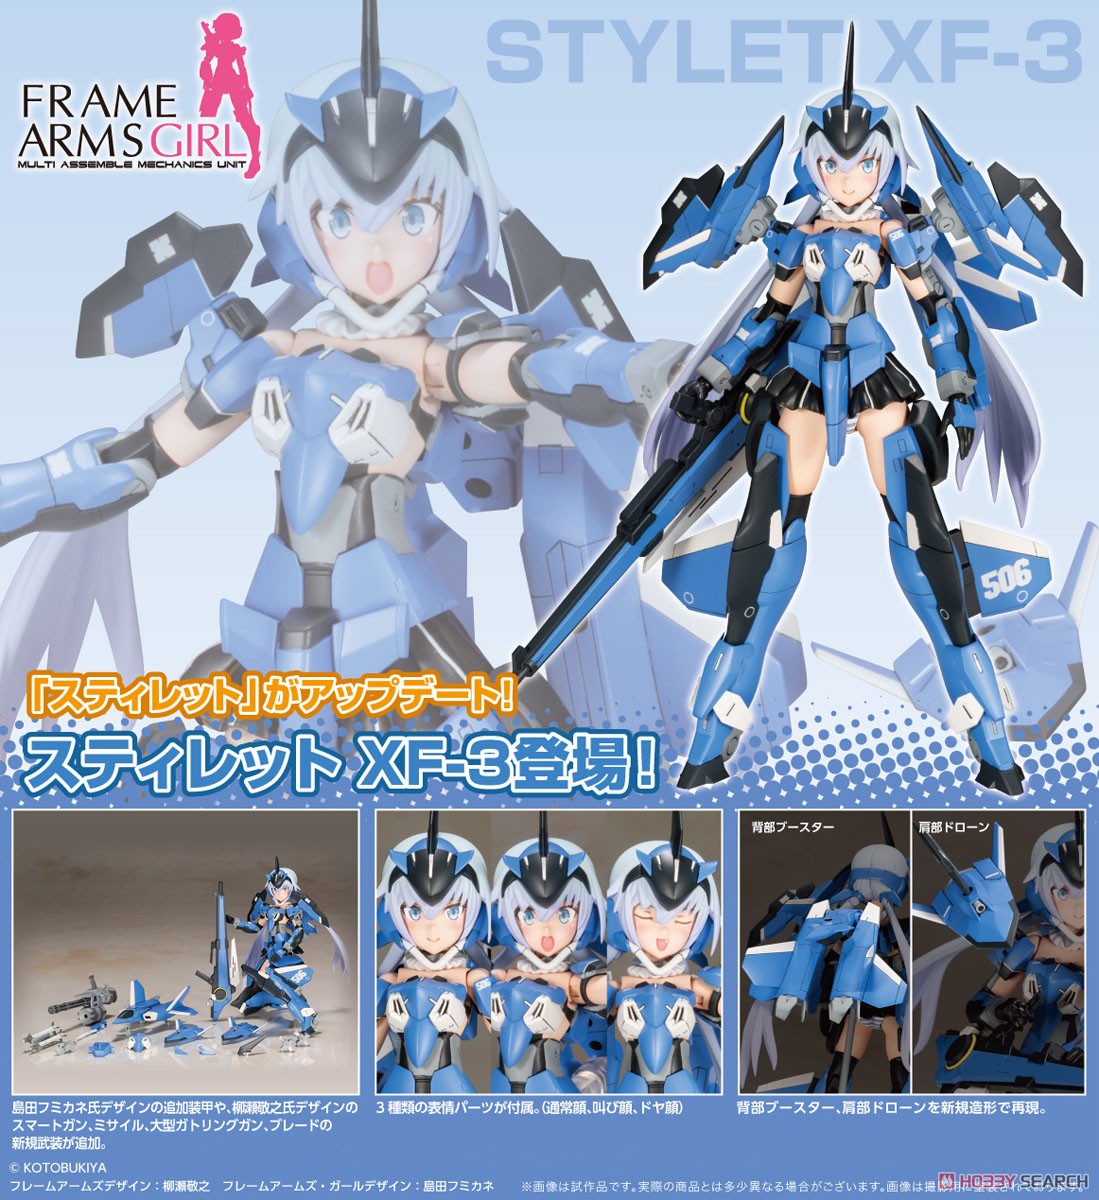 Frame Arms Girl Stylet XF-3 (Plastic model) Item picture13